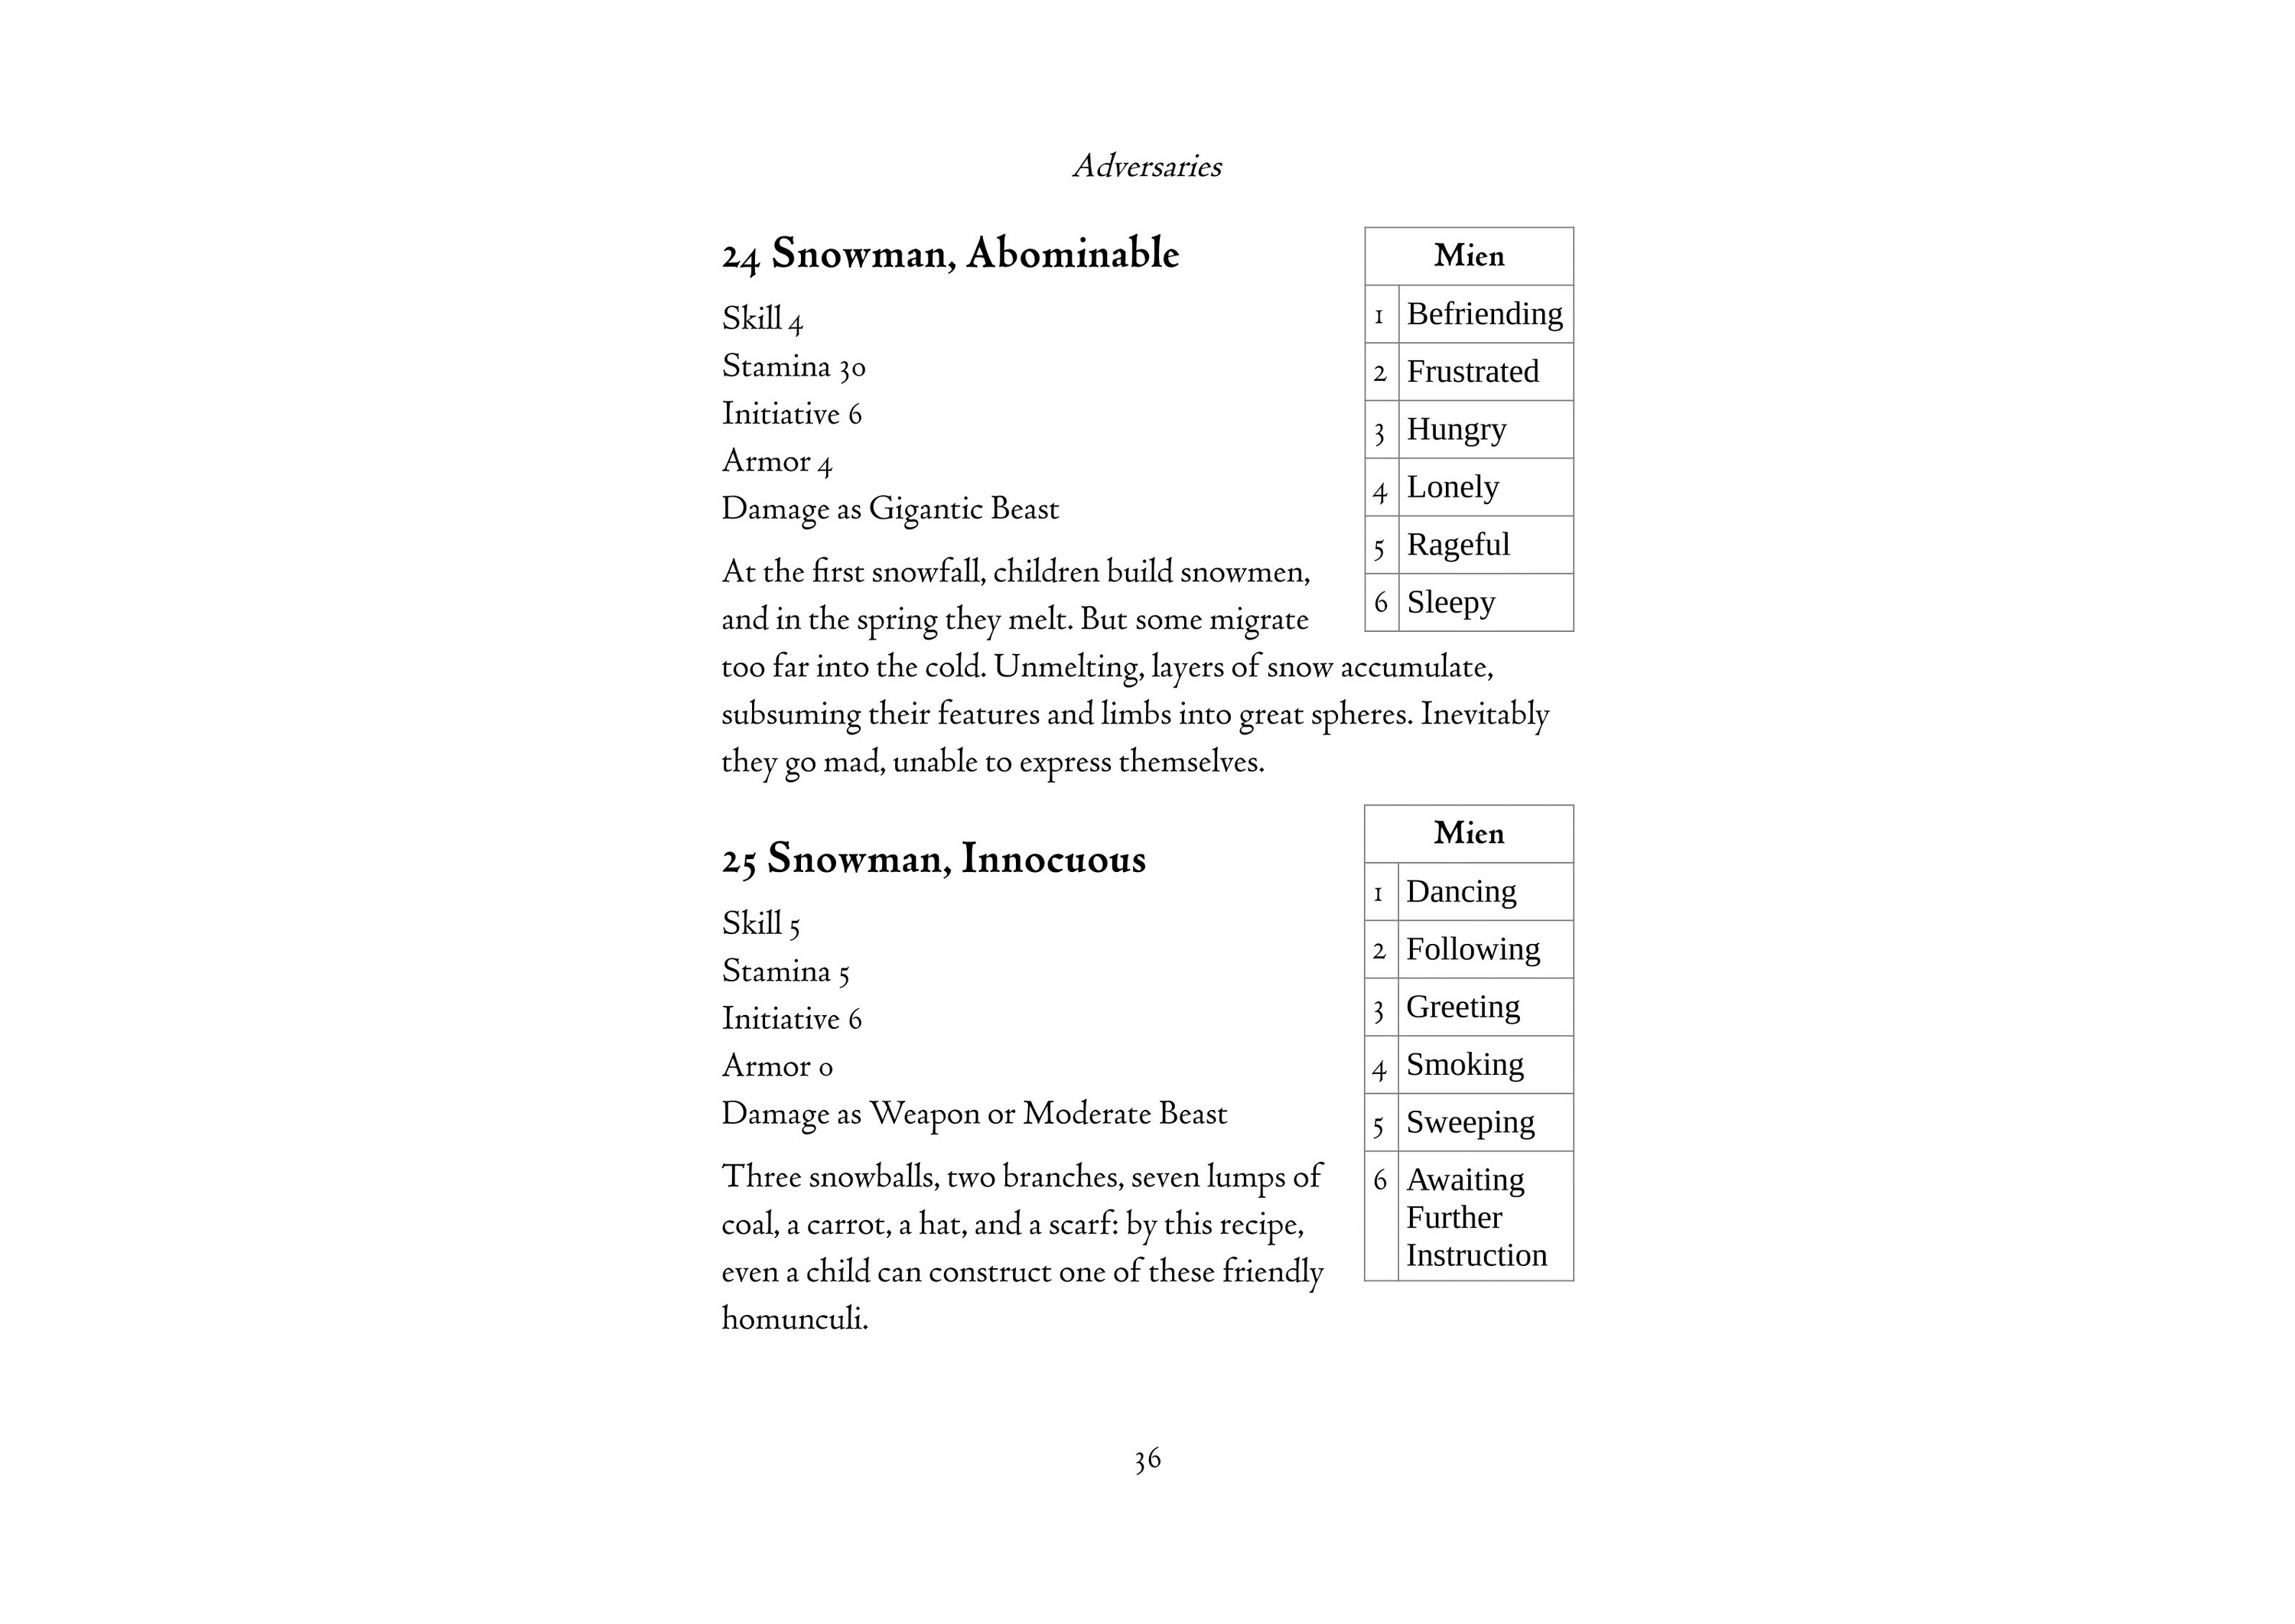 The mien tables and stats for two types of snowman are combined in one page, “Abominable” on the top half and “Innocuous” on the bottom. The resulting page is all text.